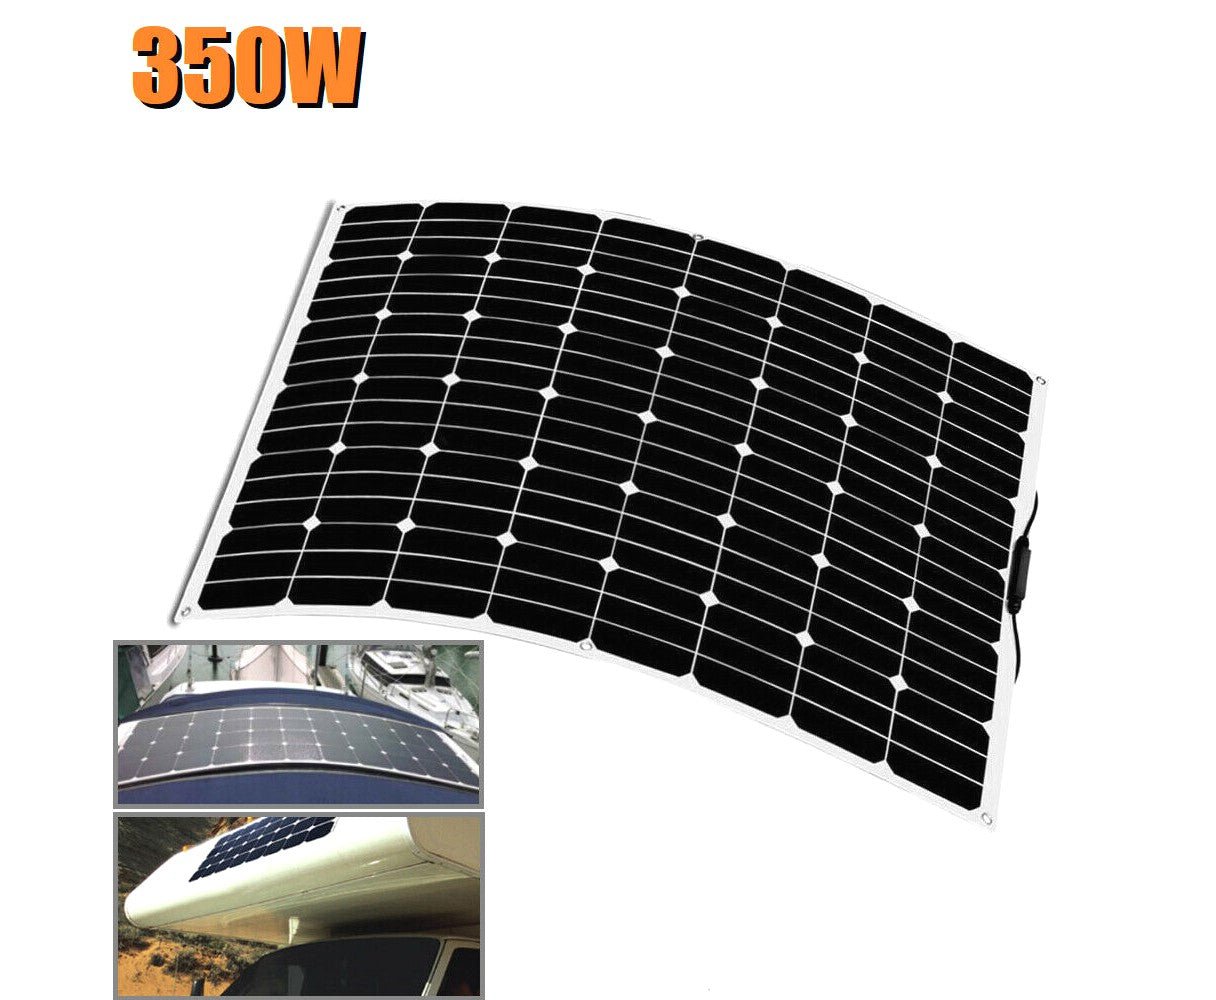 12V 350W Flexible Mono Solar Panel RV Caravan Camping Battery Charge Portable - Office Catch